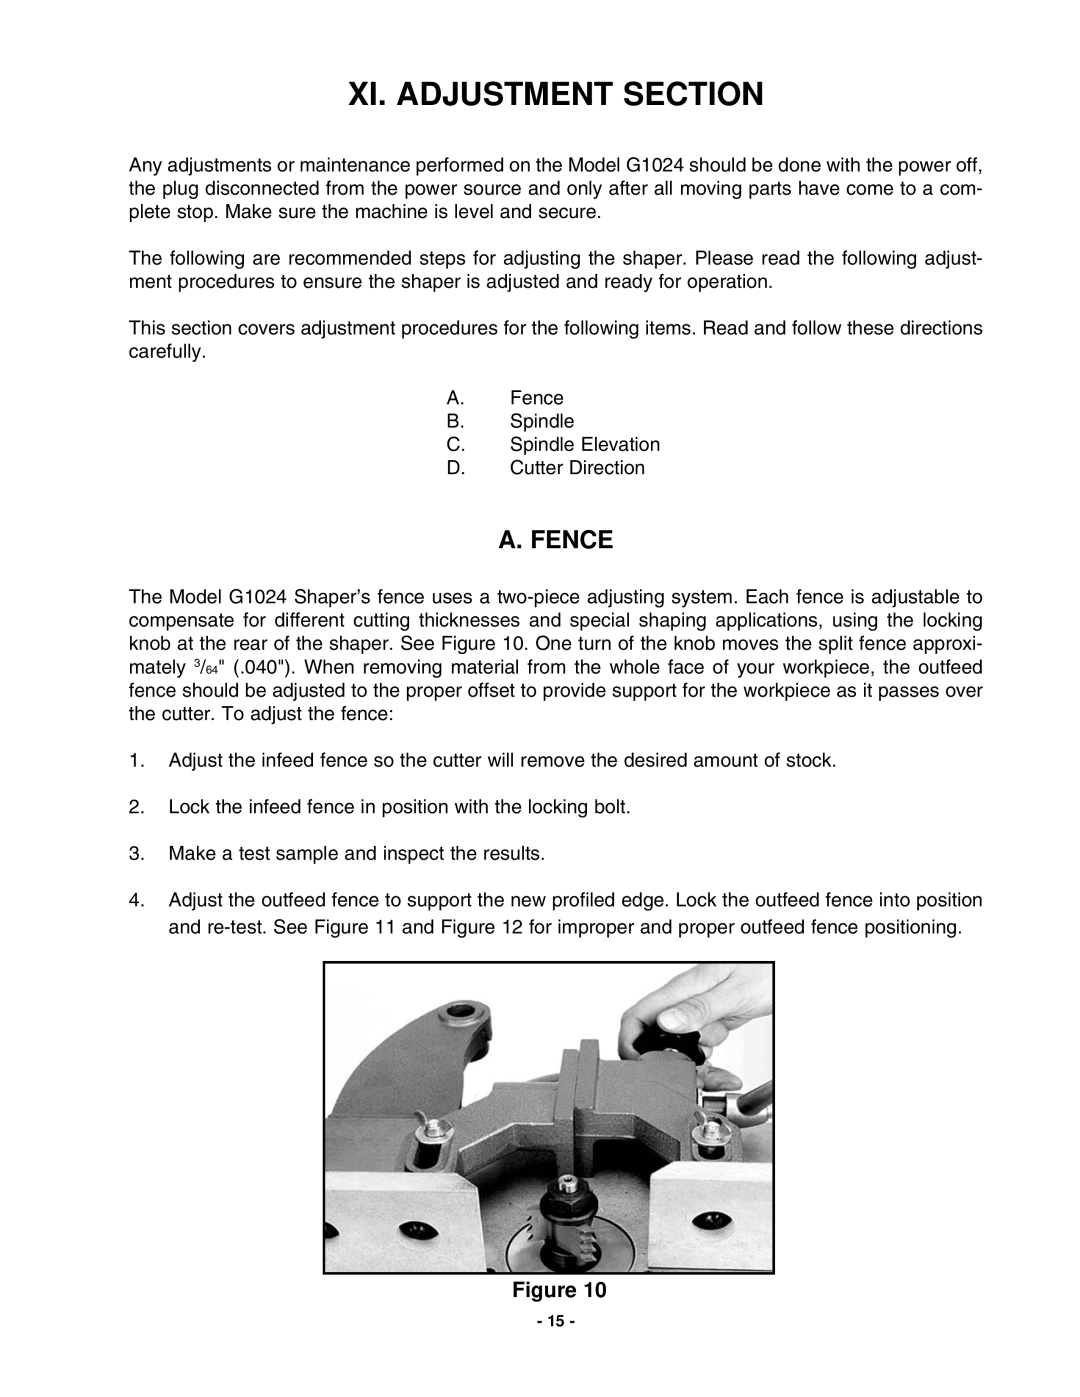 Grizzly G1024 instruction manual Xi. Adjustment Section, A. Fence 